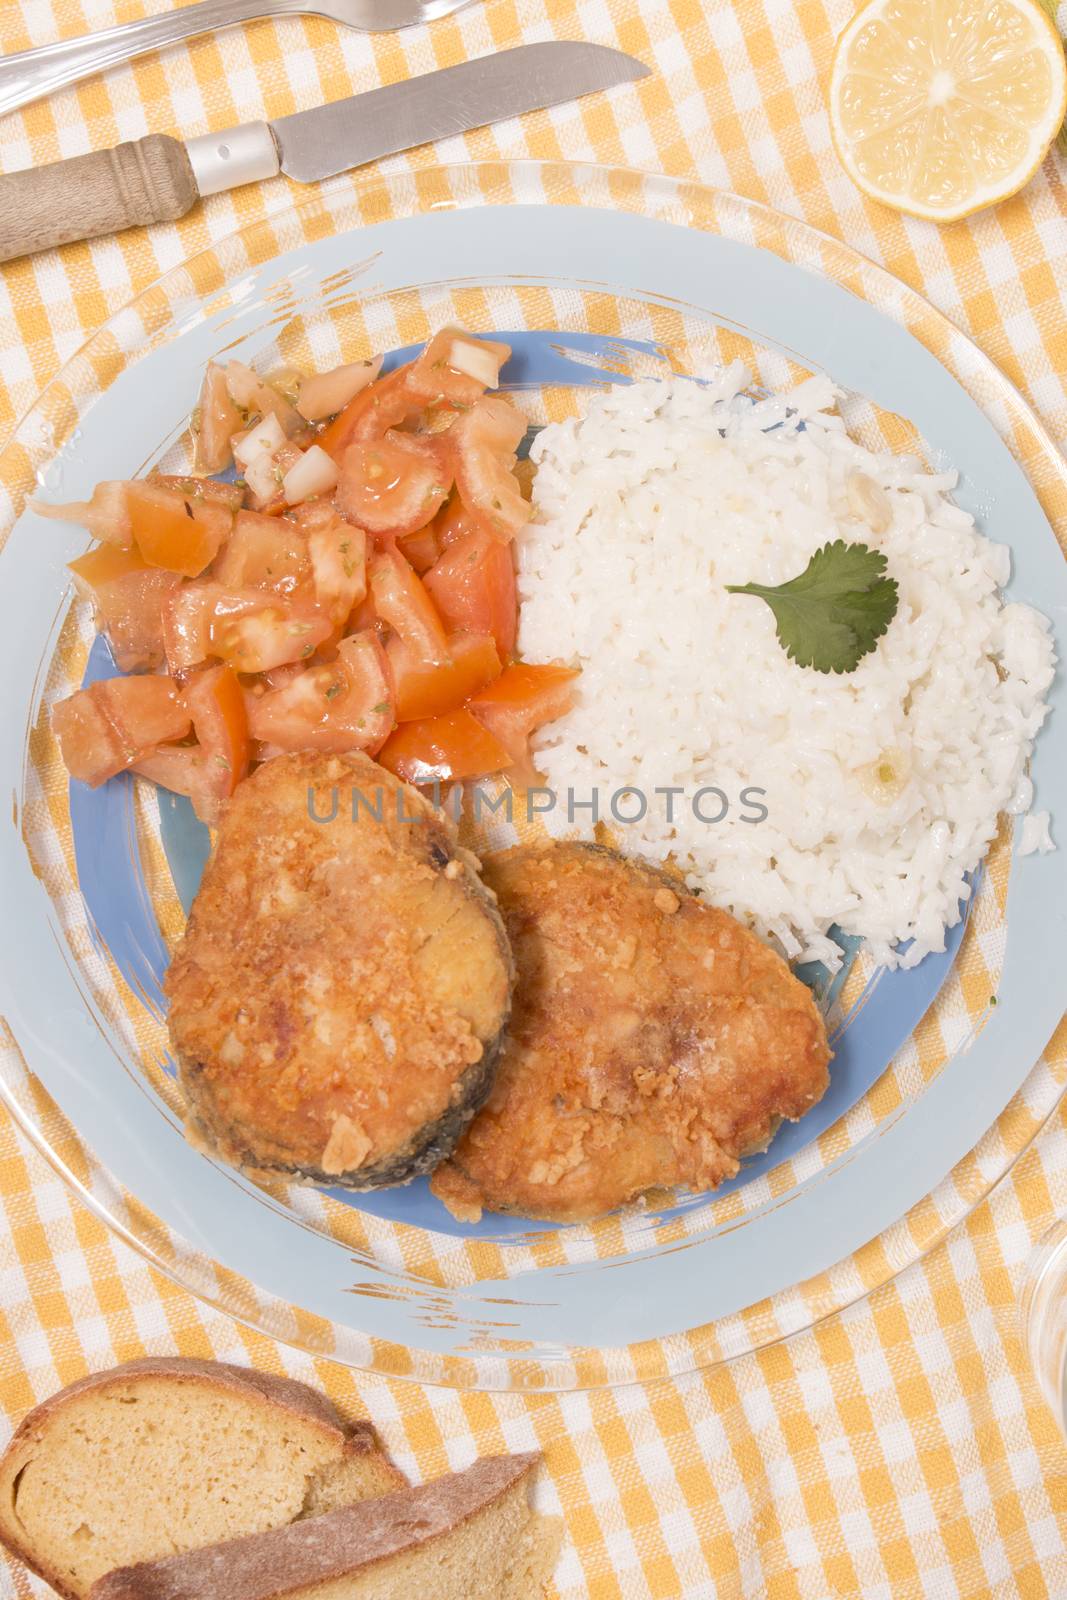 Fried hake fish with rice and tomato salad.